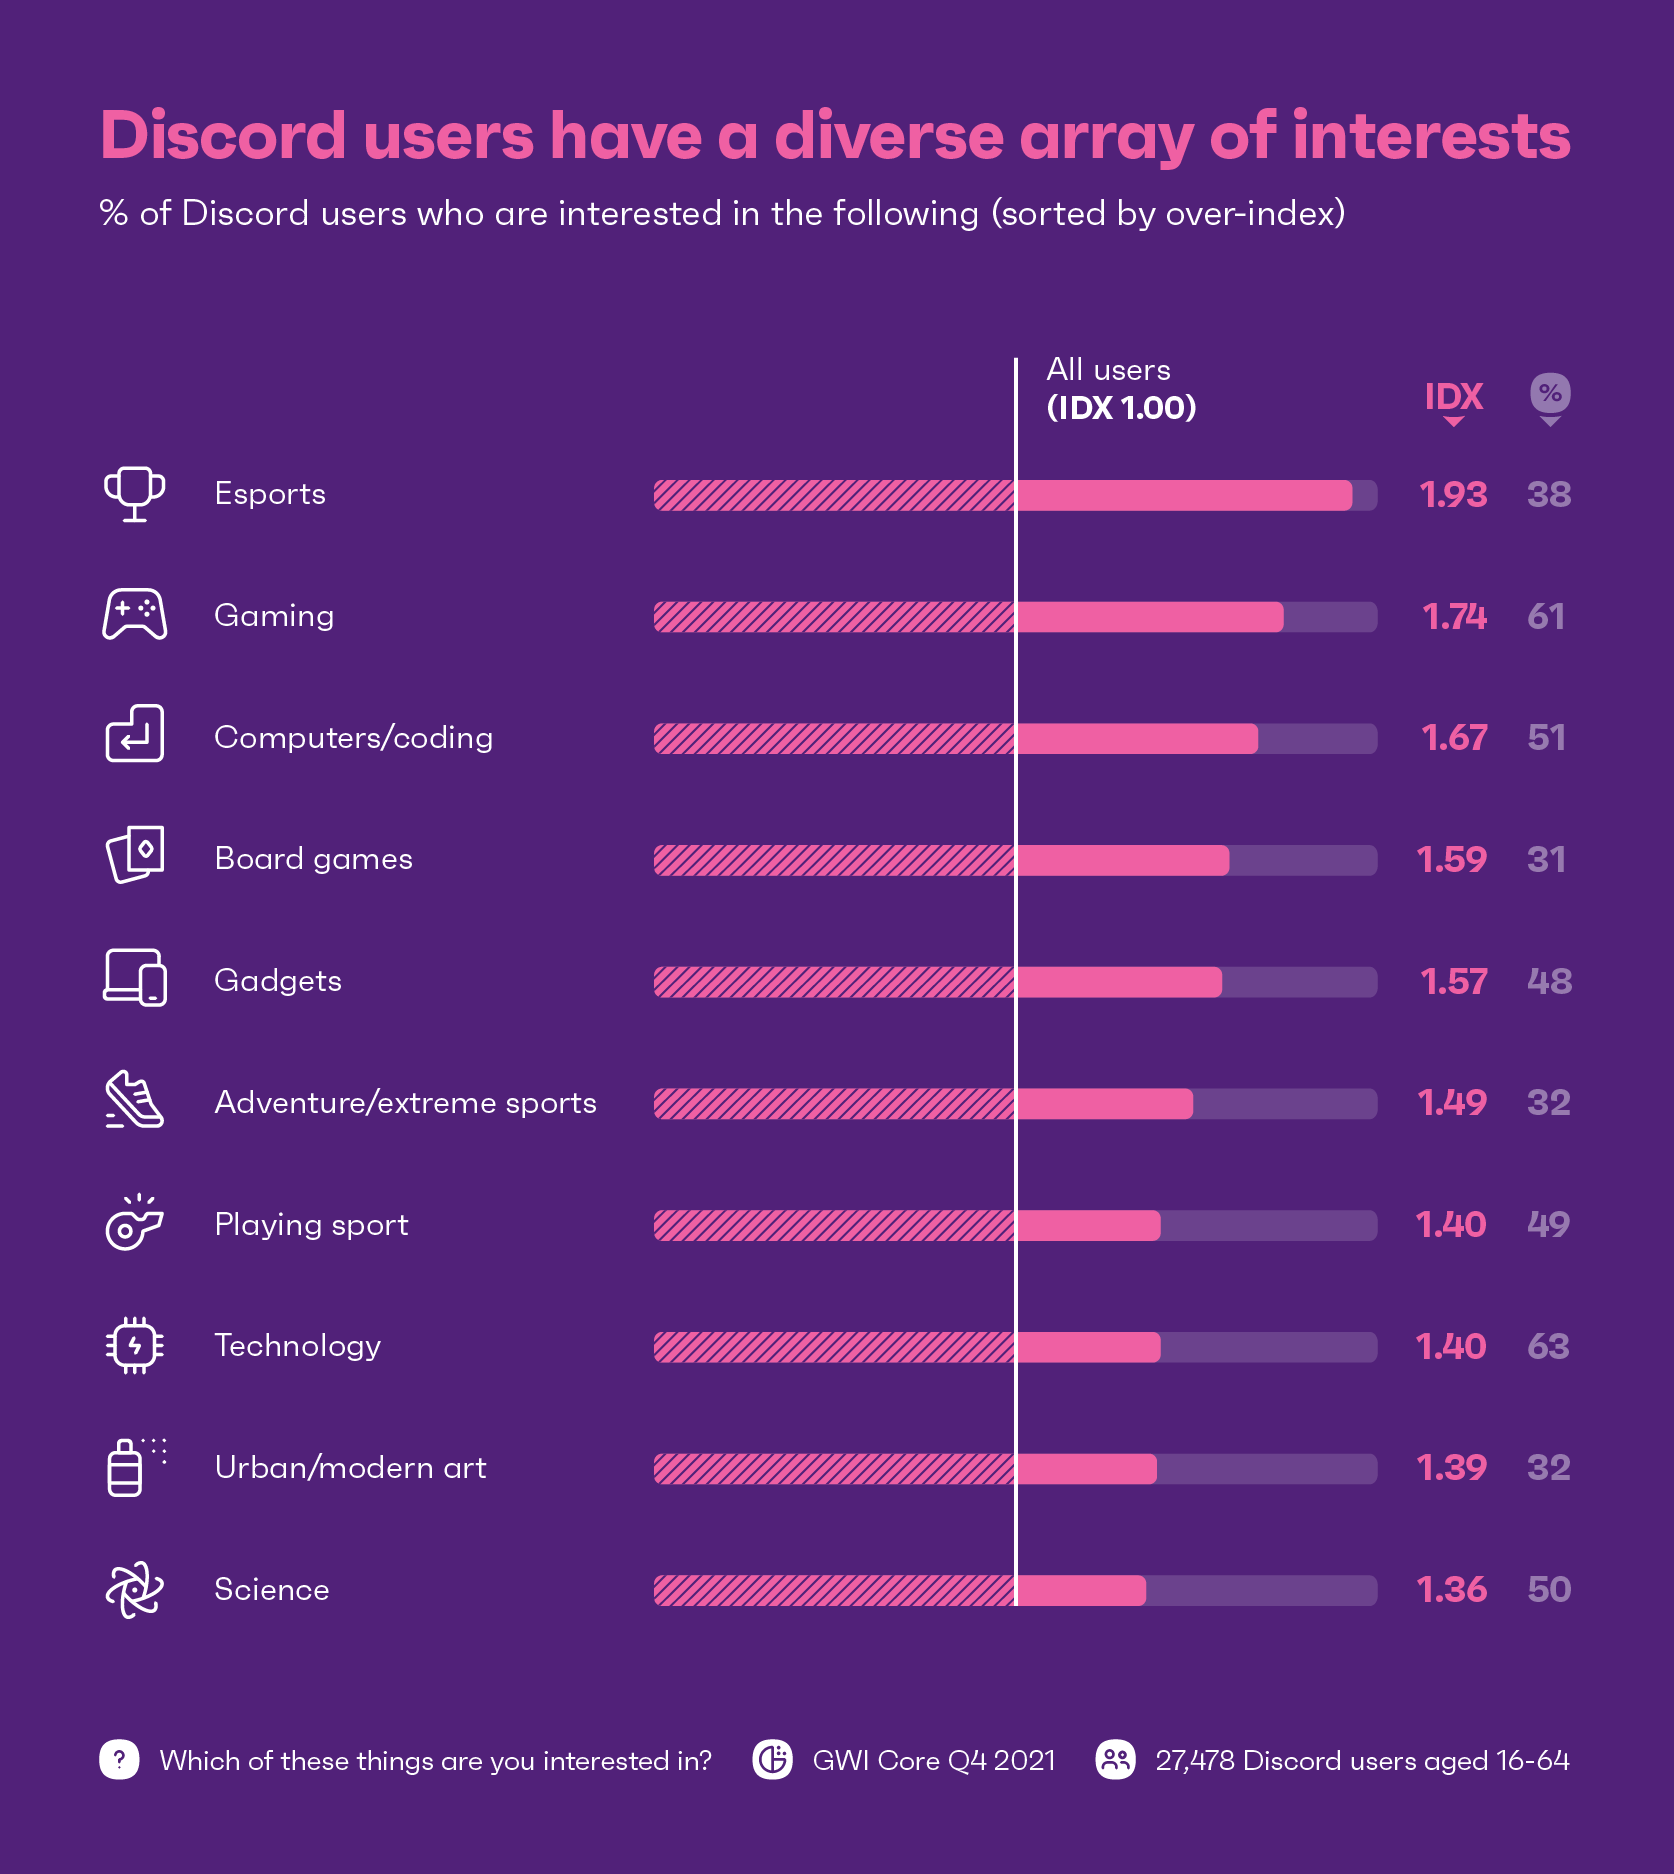 Chart showing interests of Discord users